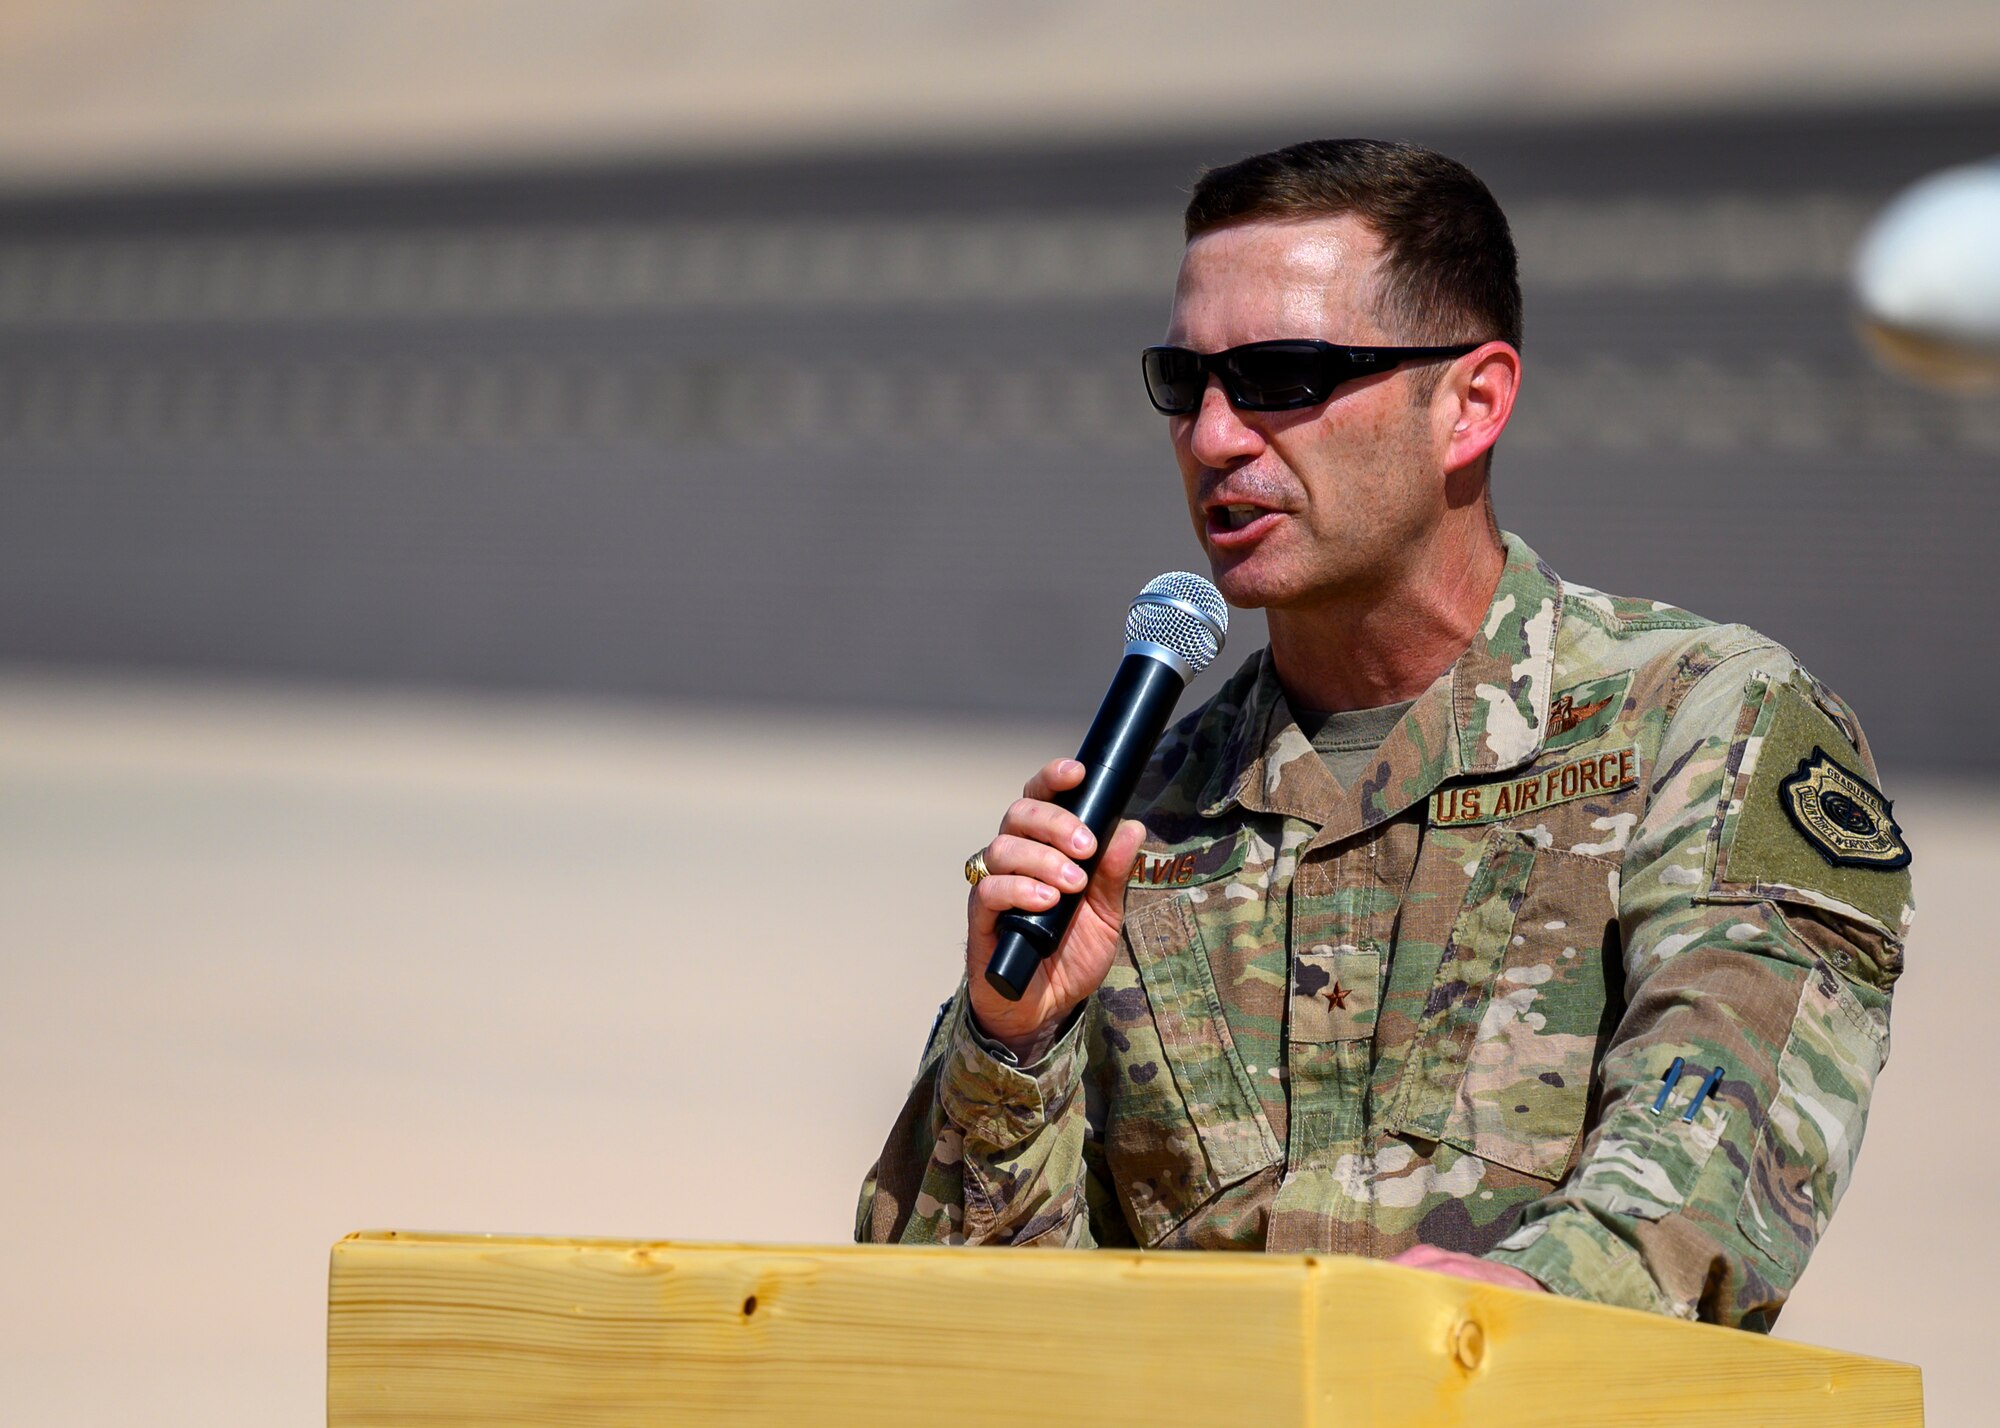 U.S. Air Force Brig. Gen. Robert Davis, 378th Air Expeditionary Wing commander, addresses the audience during the 378th Expeditionary Operations Group change of command ceremony, Prince Sultan Air Base July 5, 2021. The 378th EOG provides combat power projection in support of U.S. Central Command plans and operations. (U.S. Air Force photo by Senior Airman Samuel Earick)